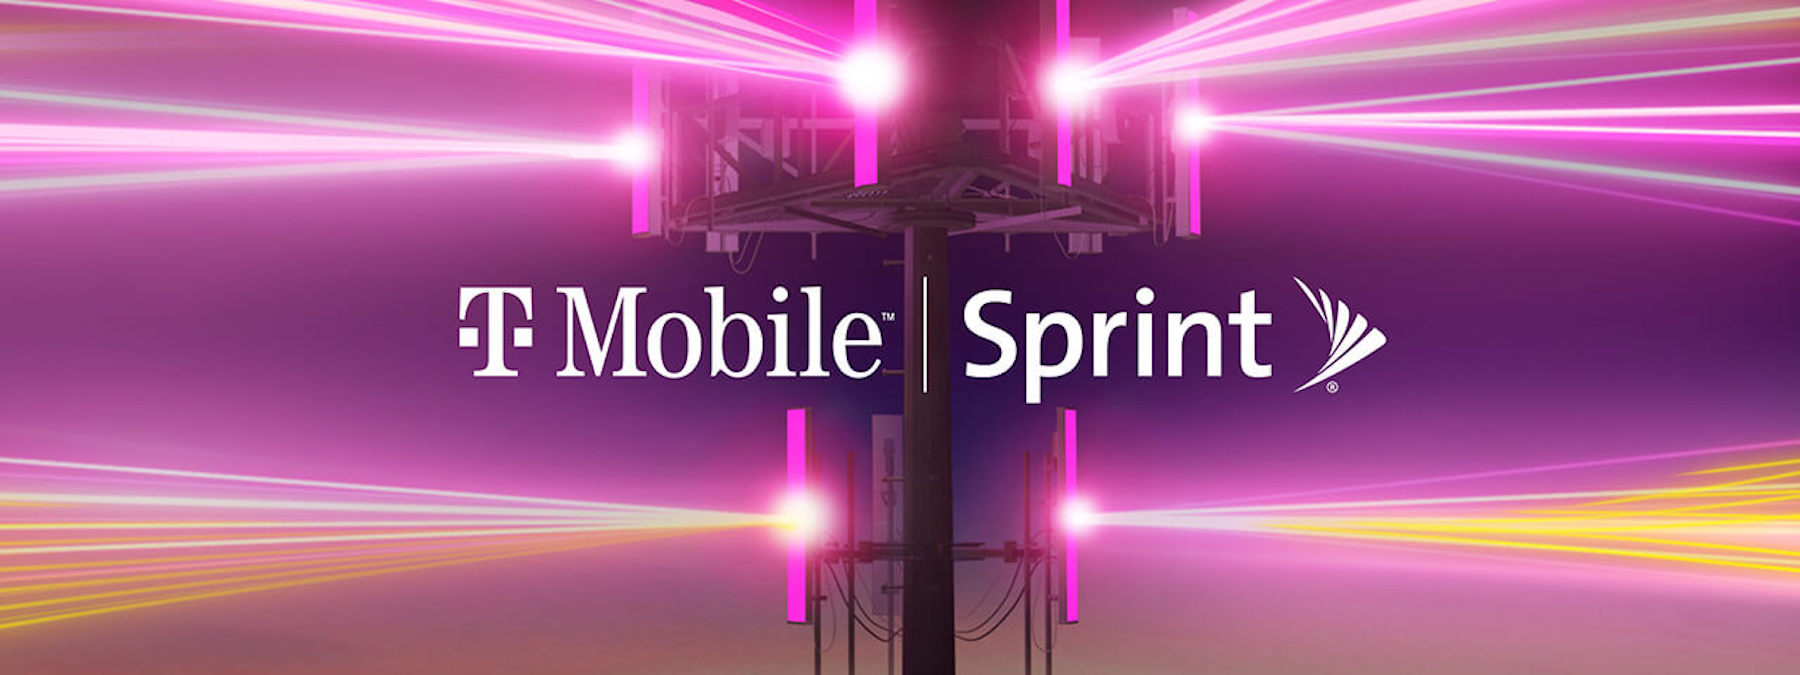 Did T-Mobile’s Merger With Sprint Hurt Wireless Customers? This Lawsuit Aims to Find Out